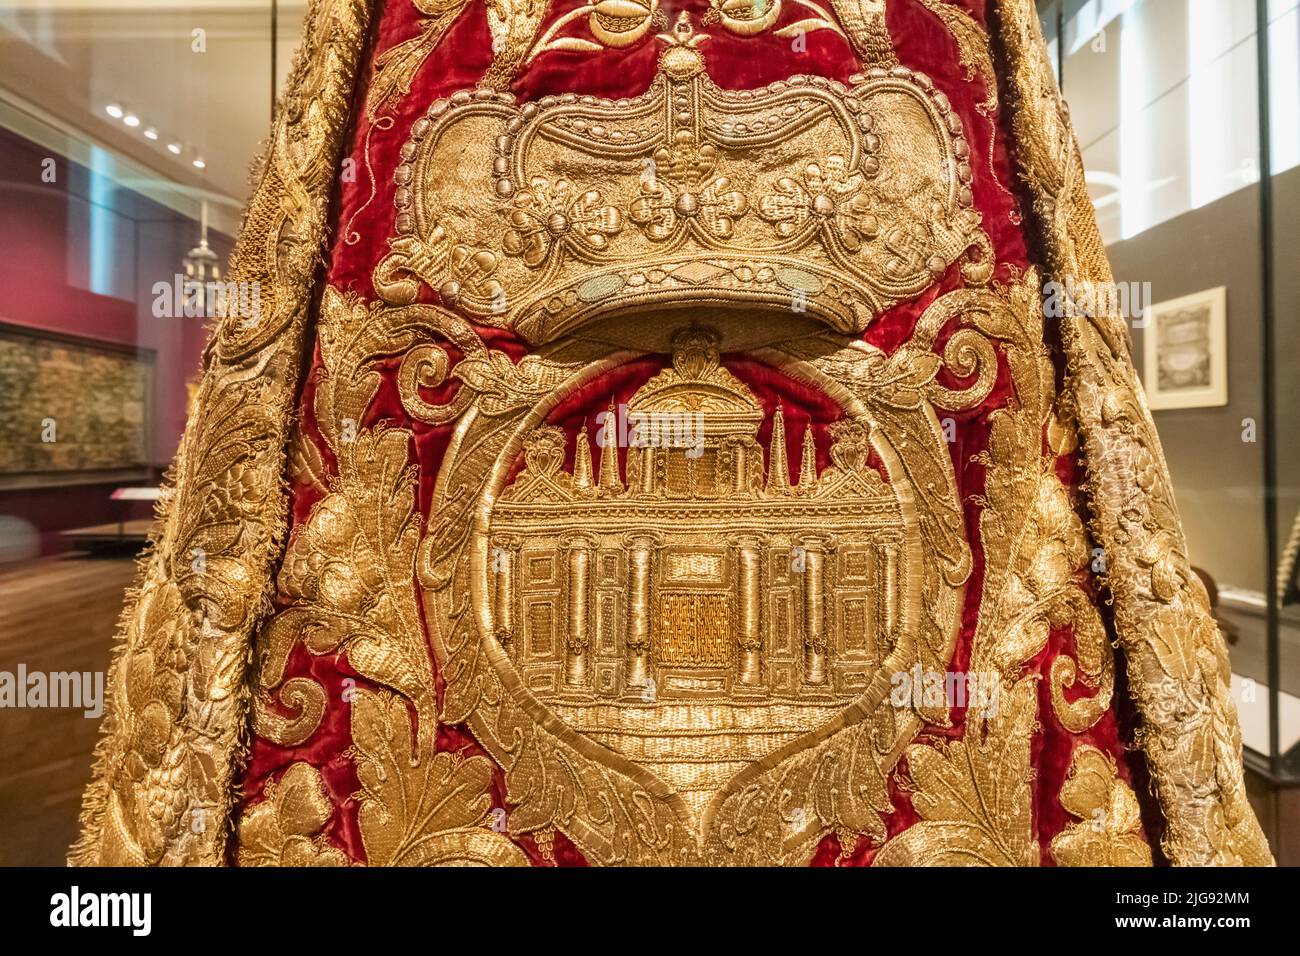 England, London, Knightsbridge, Victoria and Albert Museum, Display of Jewish Torah Mantle from Holland dated 1675 Stock Photo